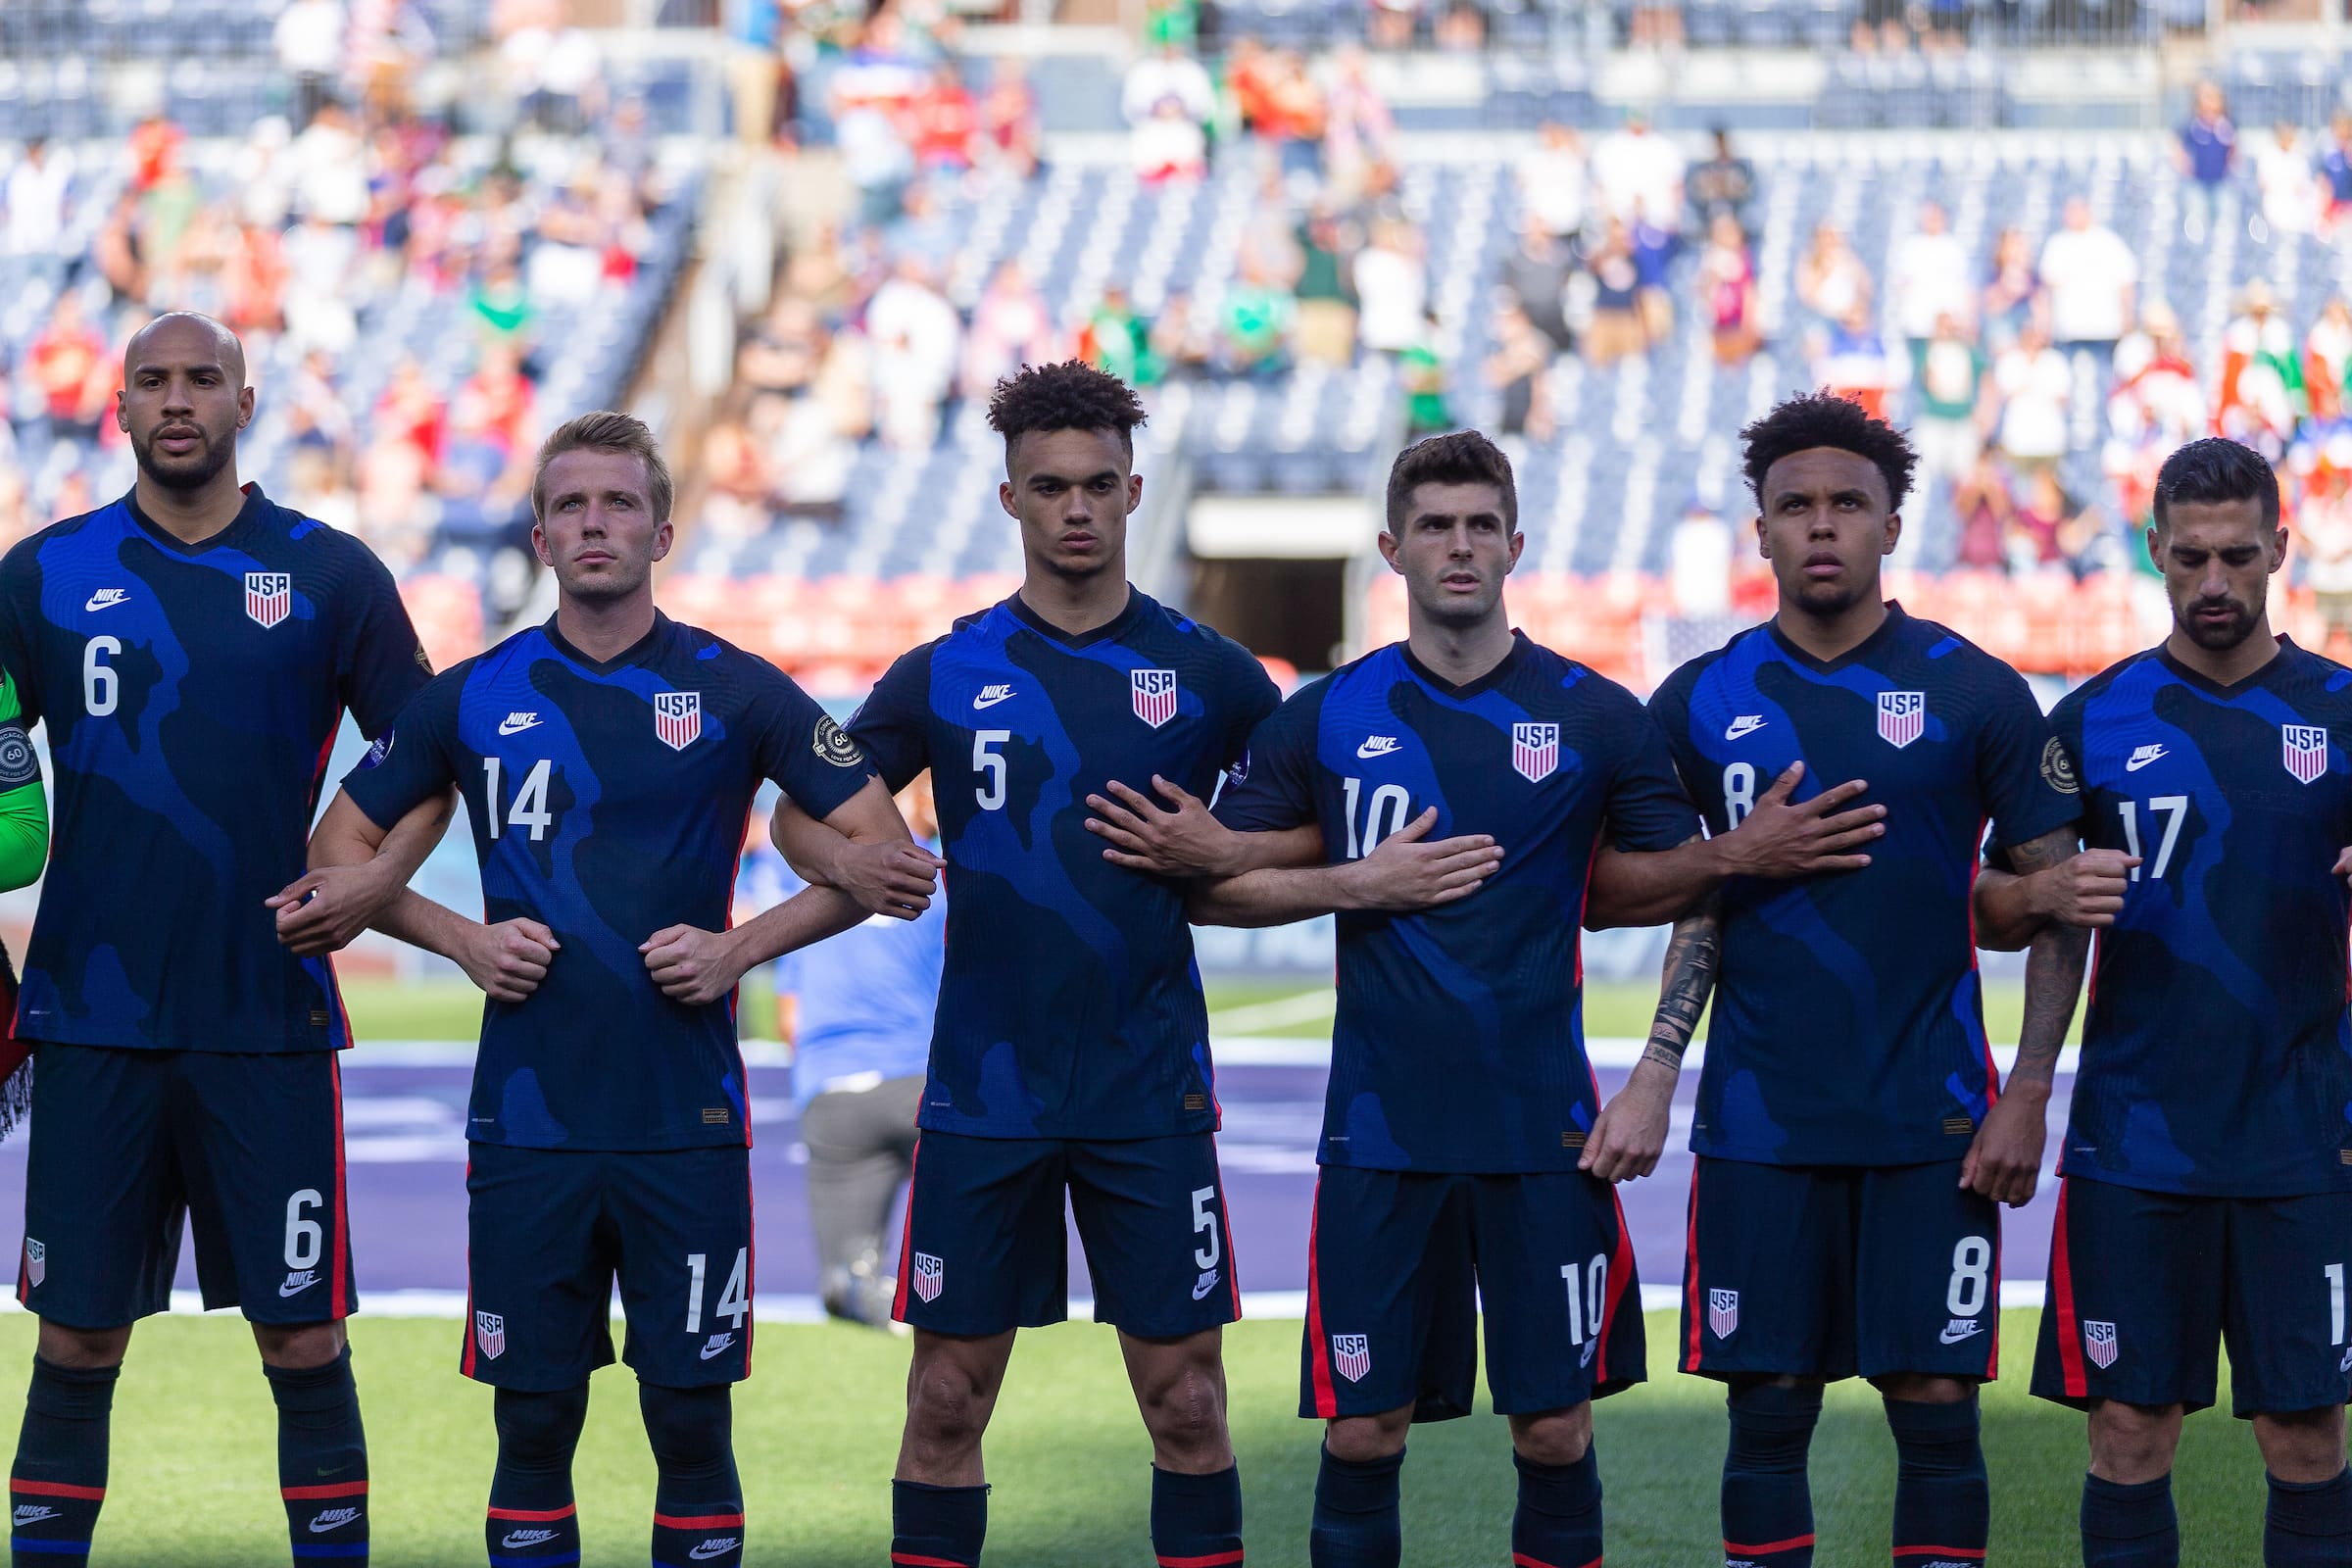 U.S MEN’S NATIONAL TEAM QUALIFIES FOR THE 2022 WORLD CUP.